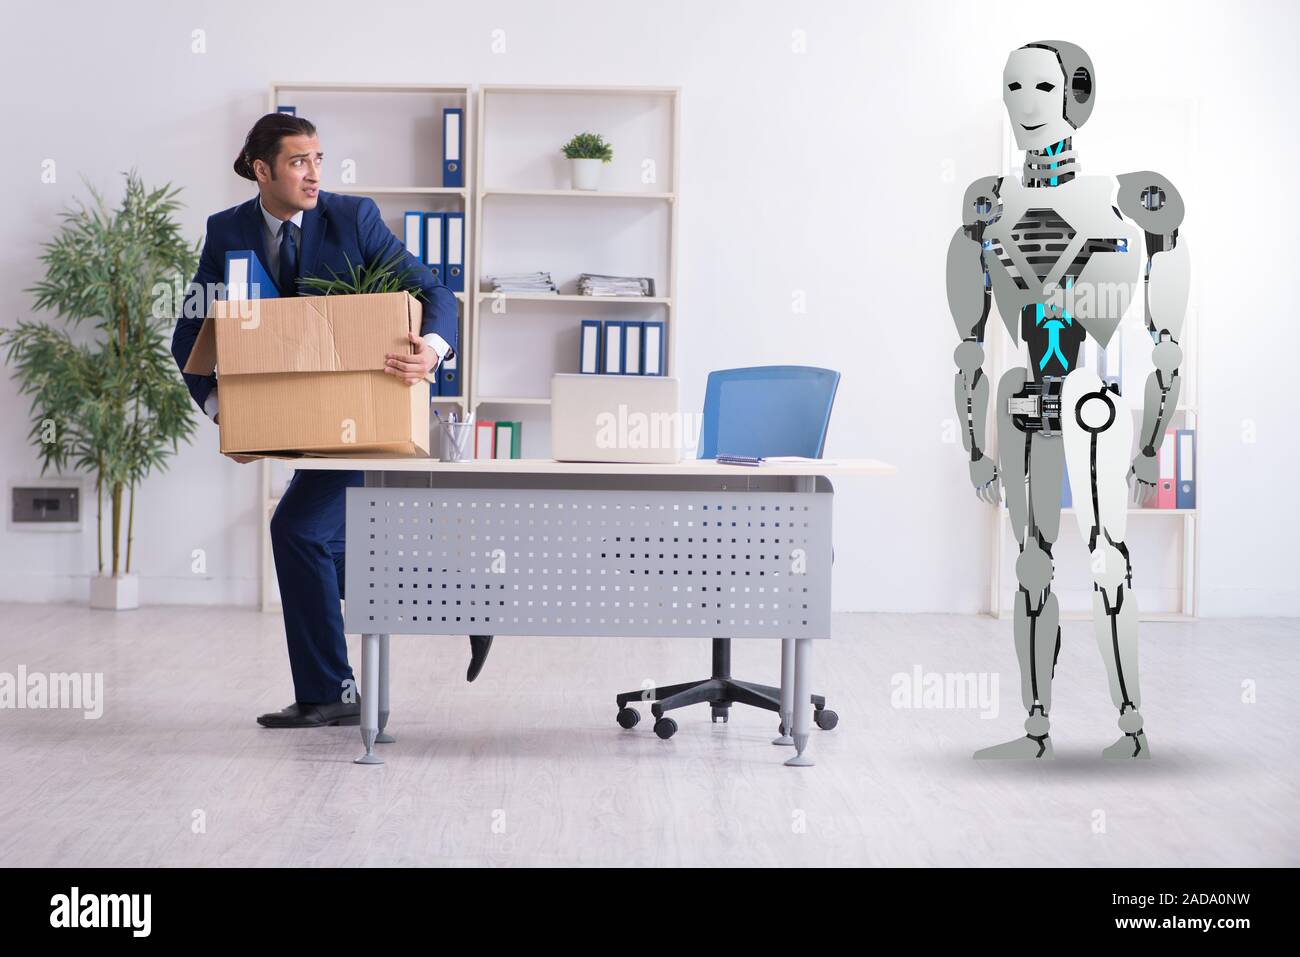 Concept of robots replacing humans in offices Stock Photo - Alamy